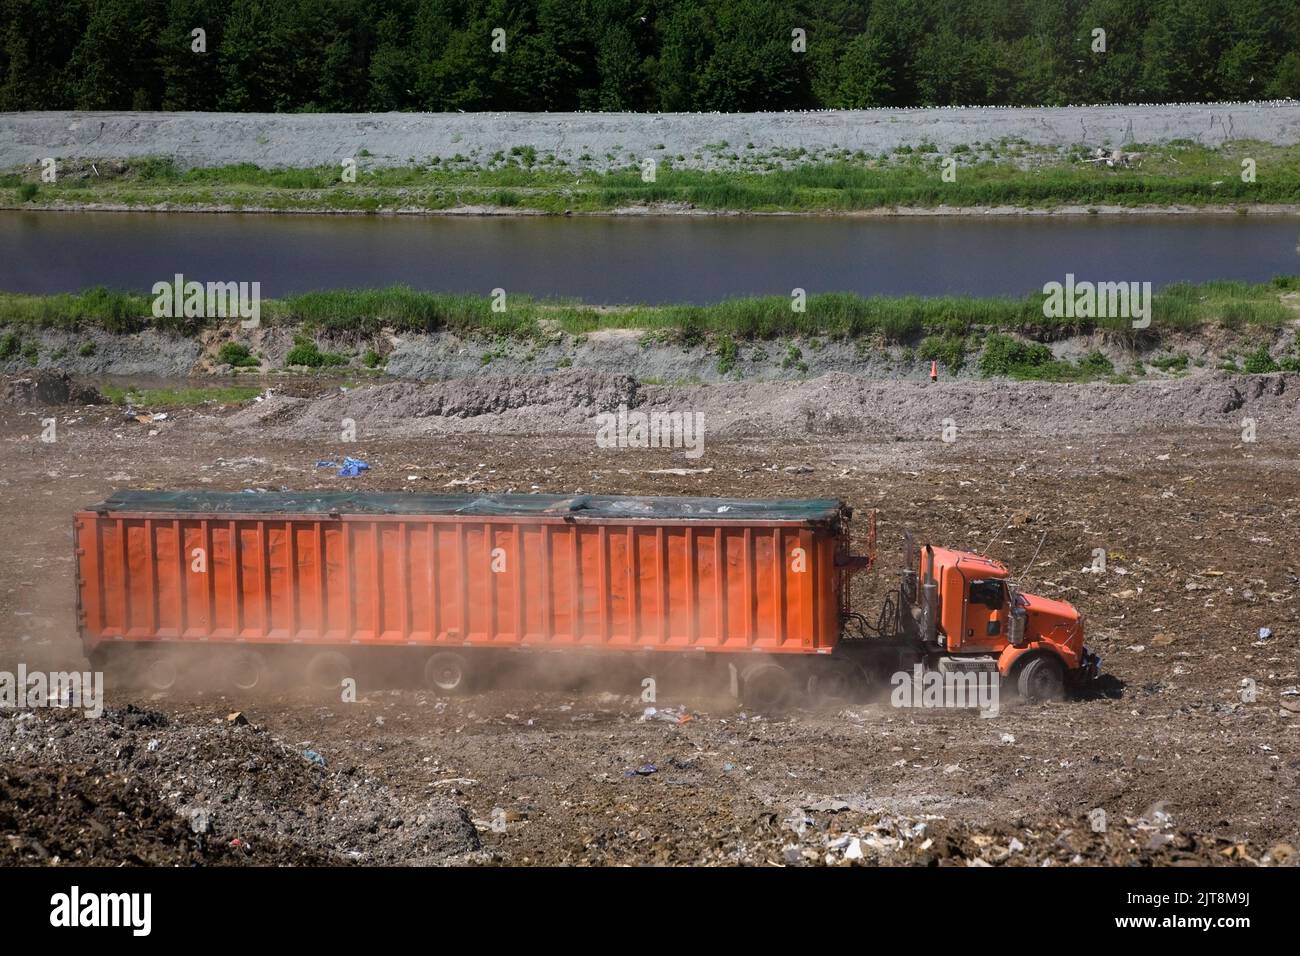 Transportation truck at waste management site. Stock Photo